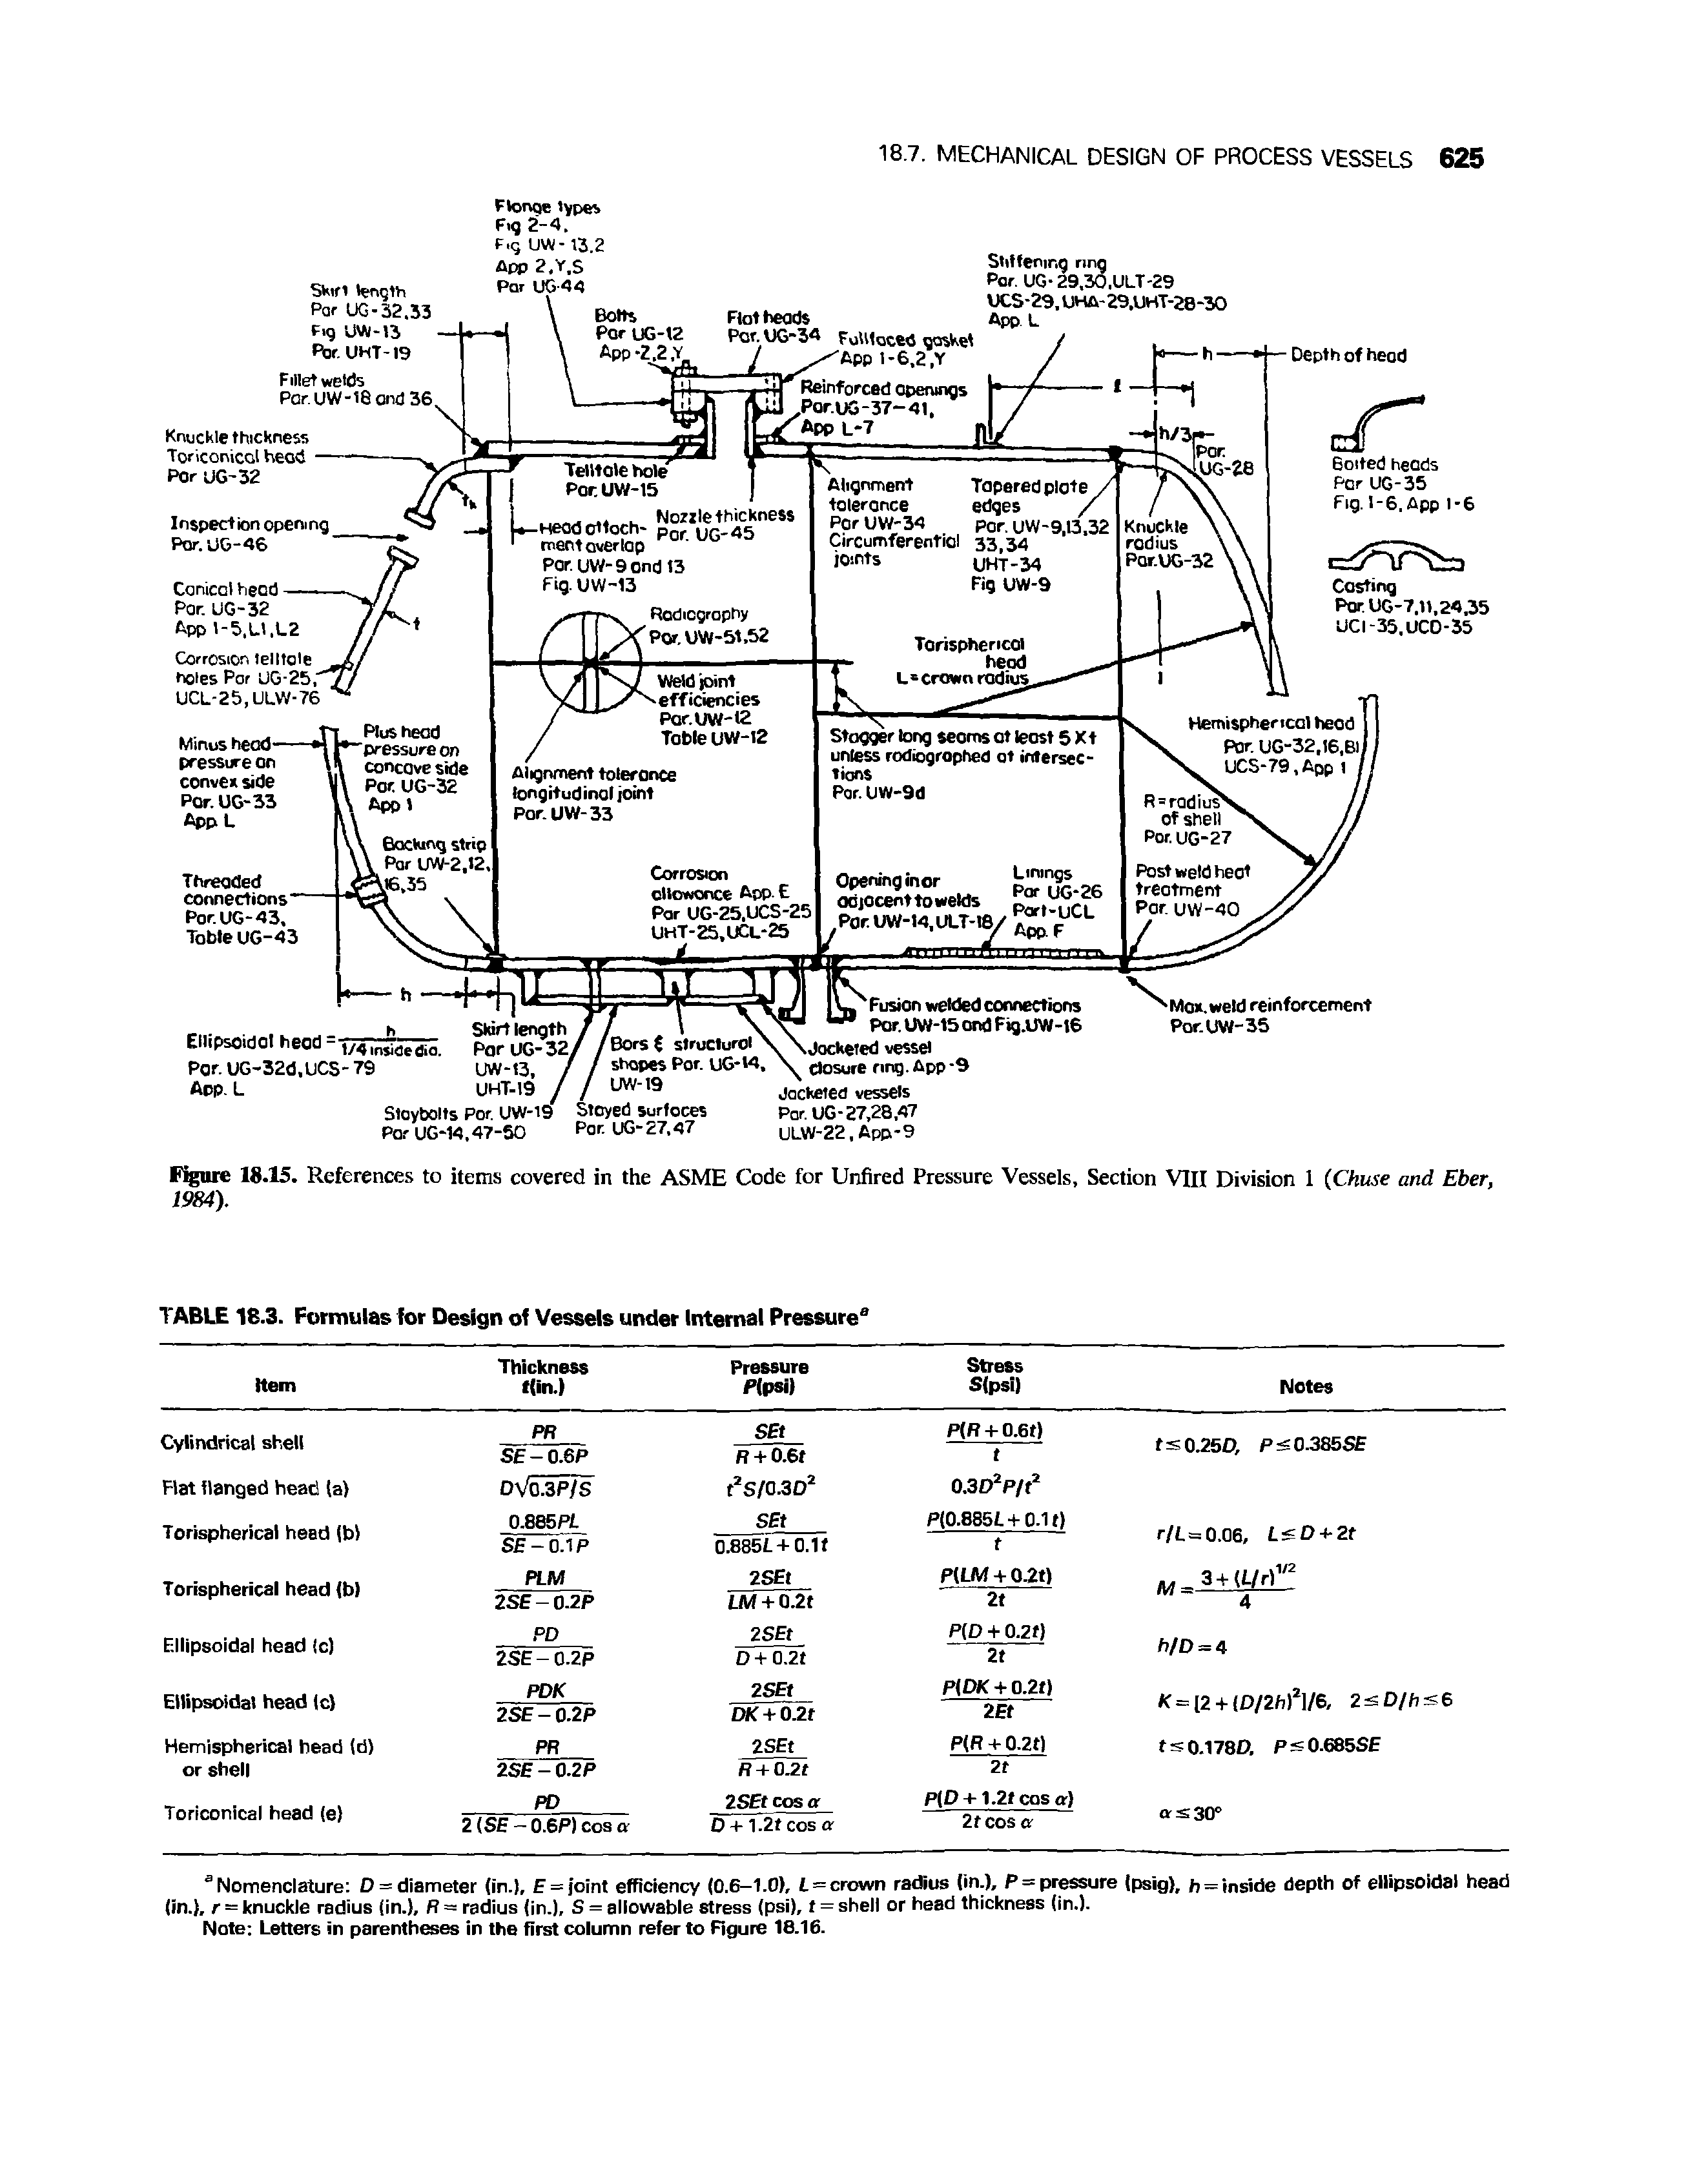 Figure 18.15. References to items covered in the ASME Code for Unfired Pressure Vessels, Section VIII Division 1 (Chuse and Eber, 1984).